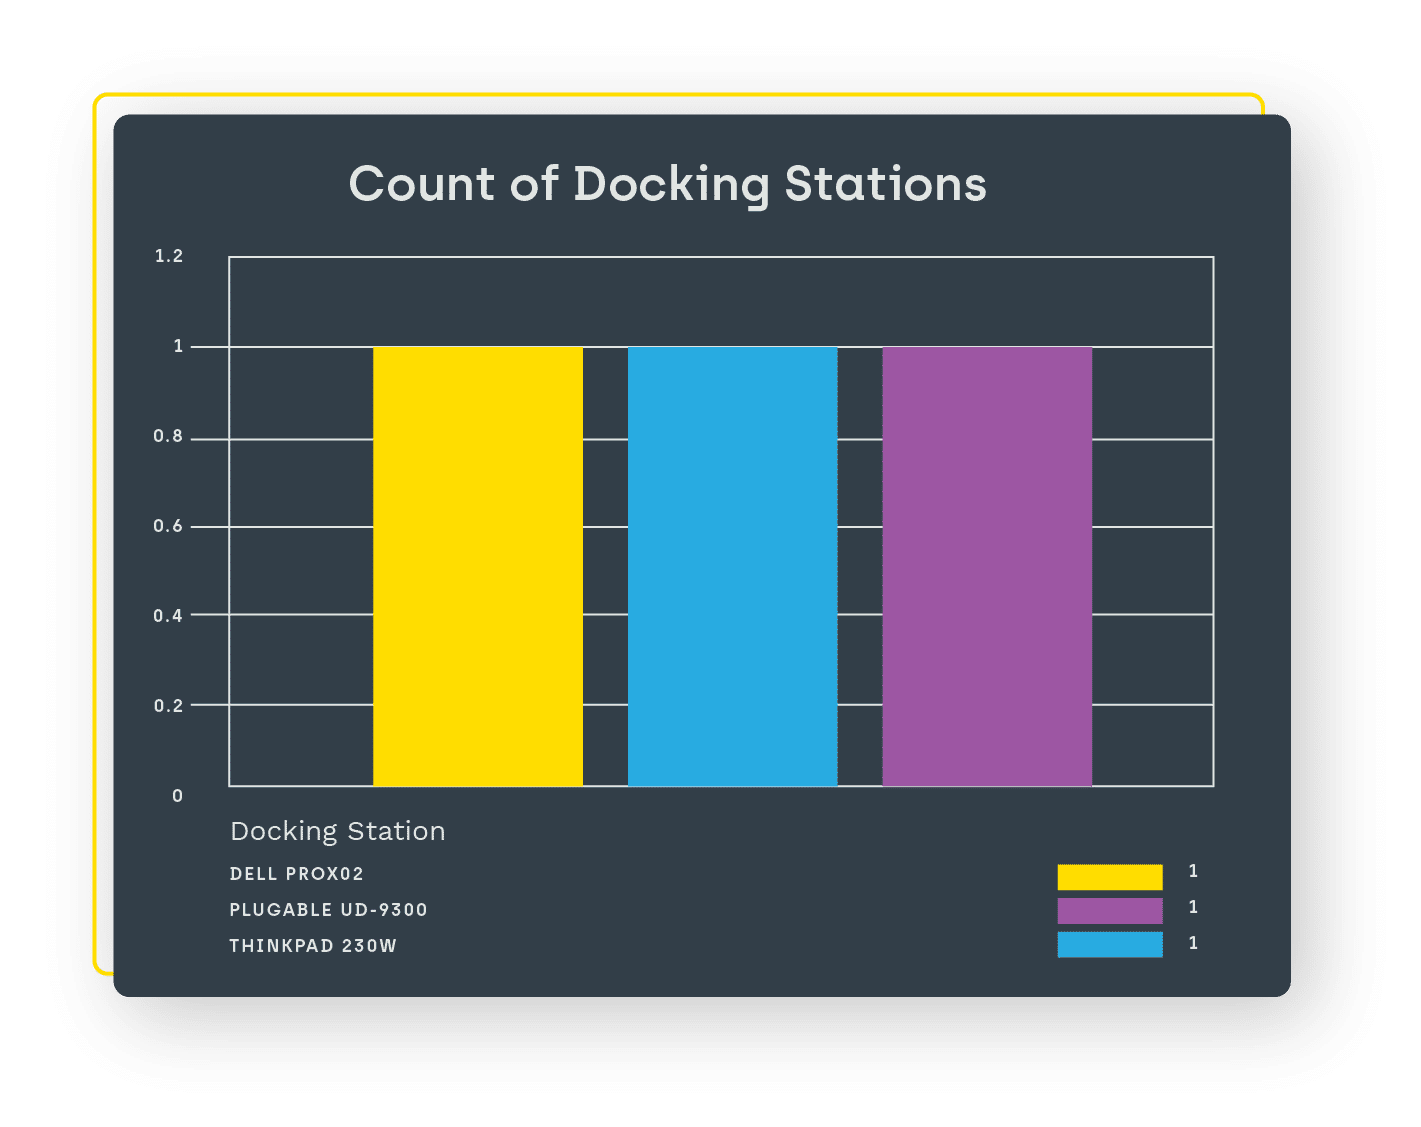 Count of Docking Stations